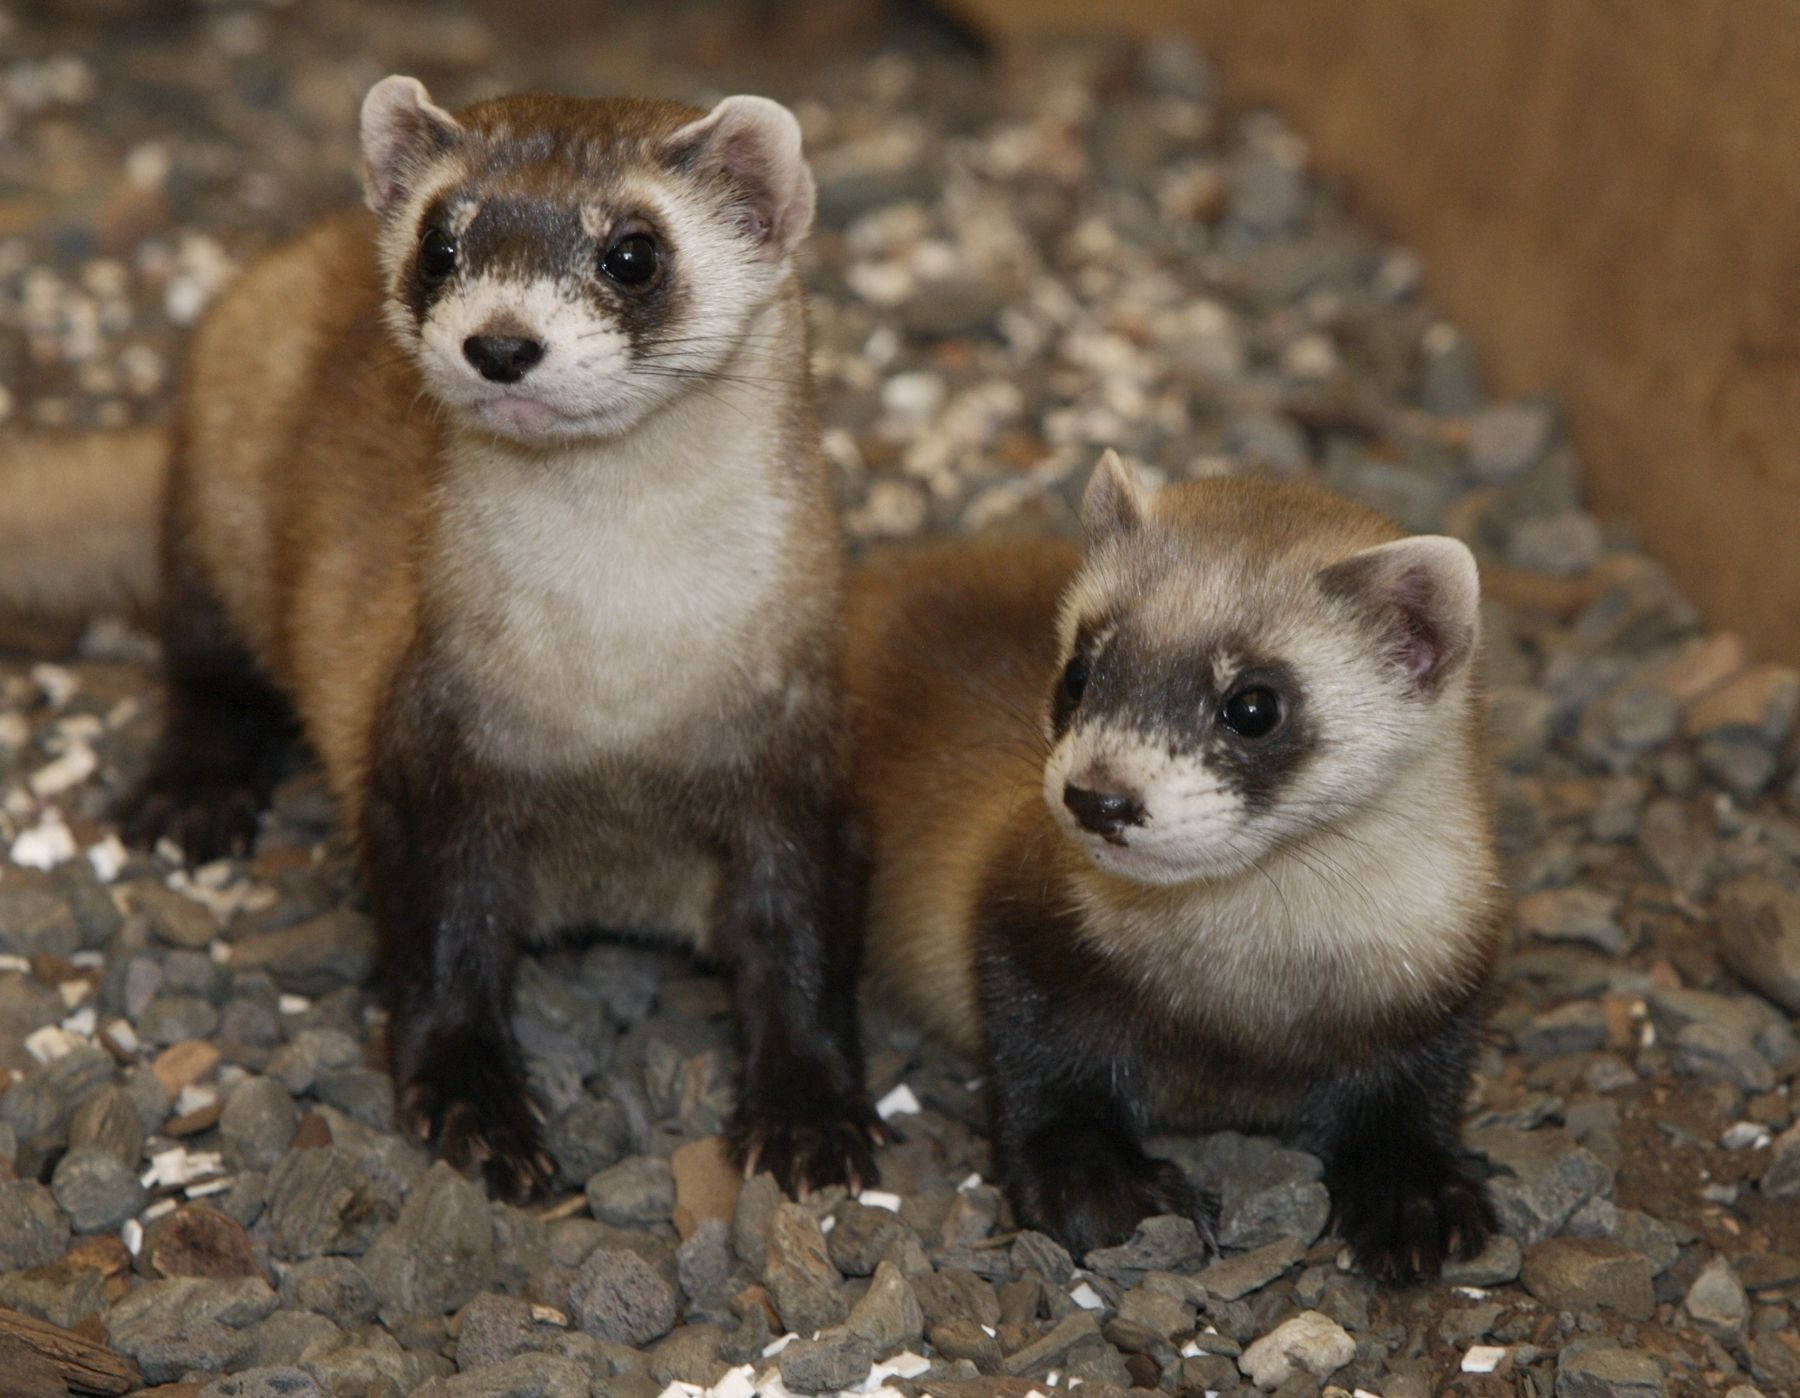 A Close-Up Image of a Black-Footed Ferret Wallpaper